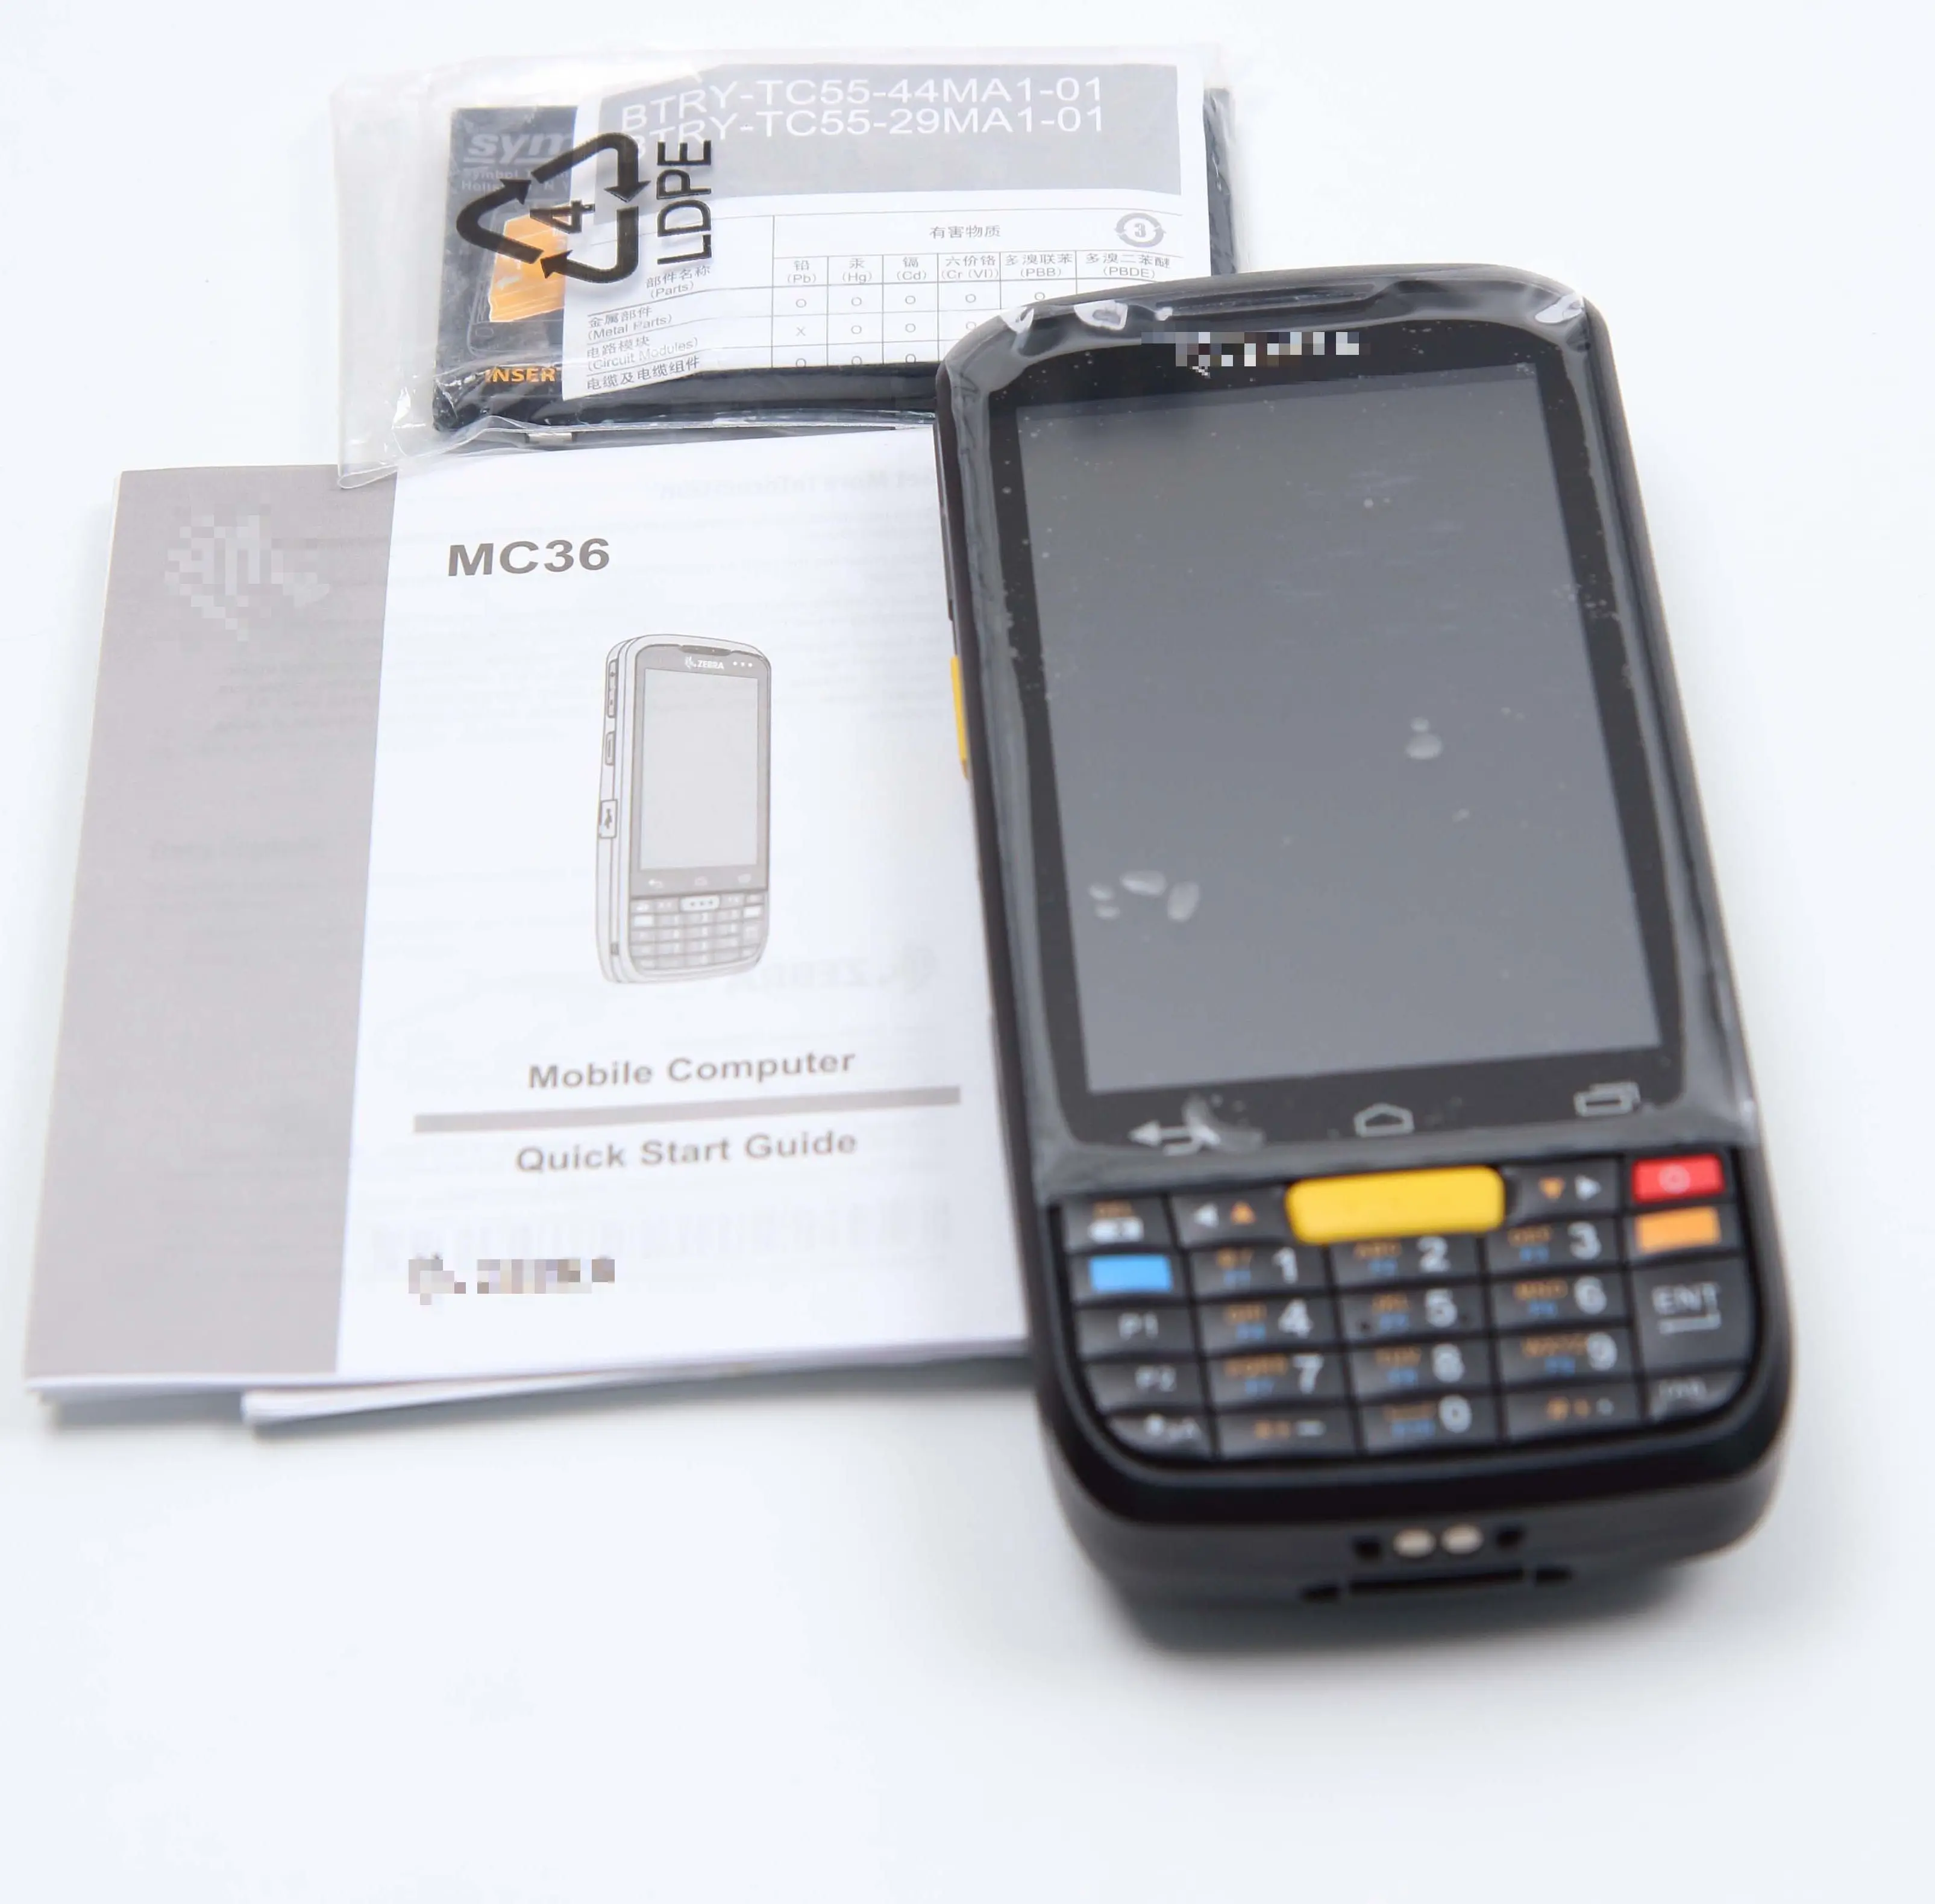 

MC36A0 Handheld 1D Barcode Scanner Android Mobile Computer Data Collector MC36A0-0LN0CE-IN